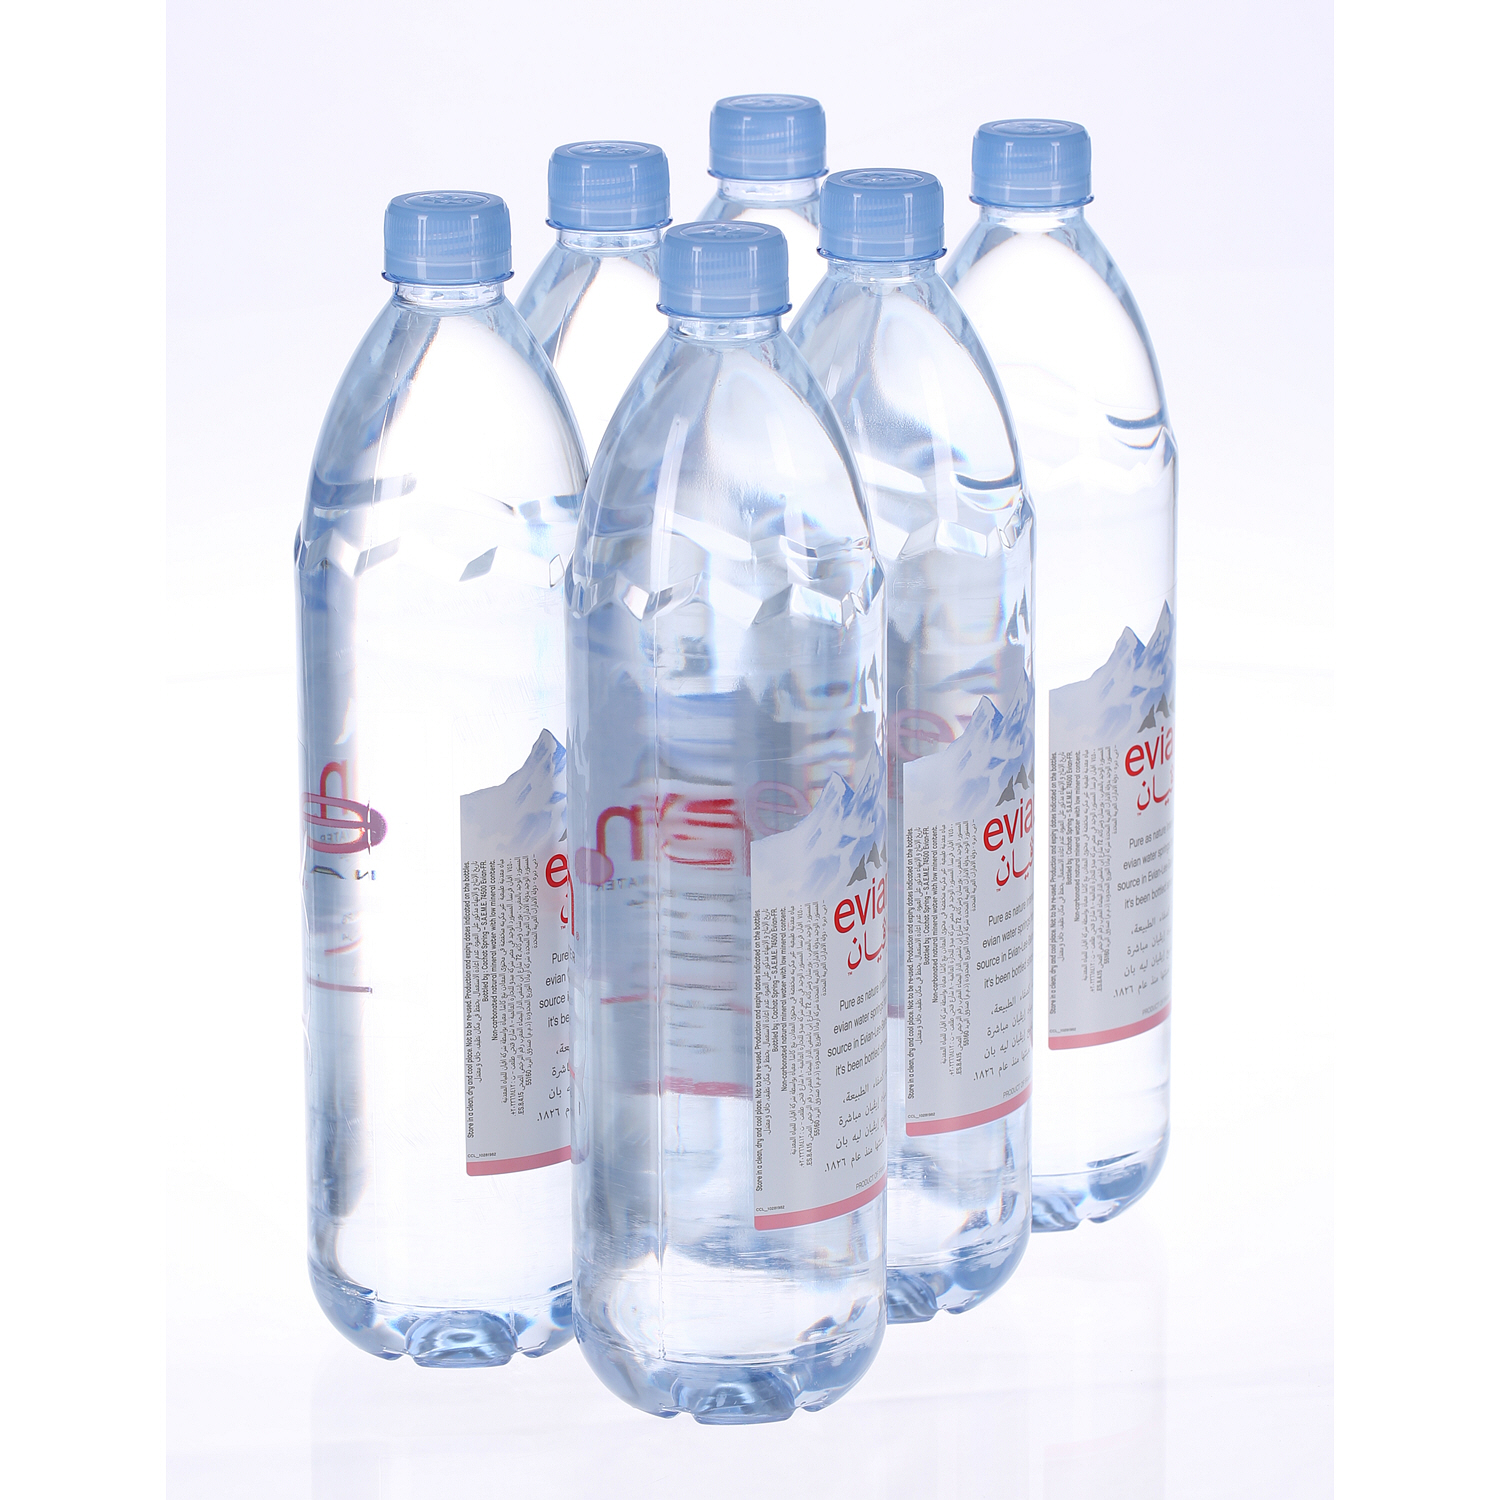 Evian Mineral Water 1.5Ltr X 6'S